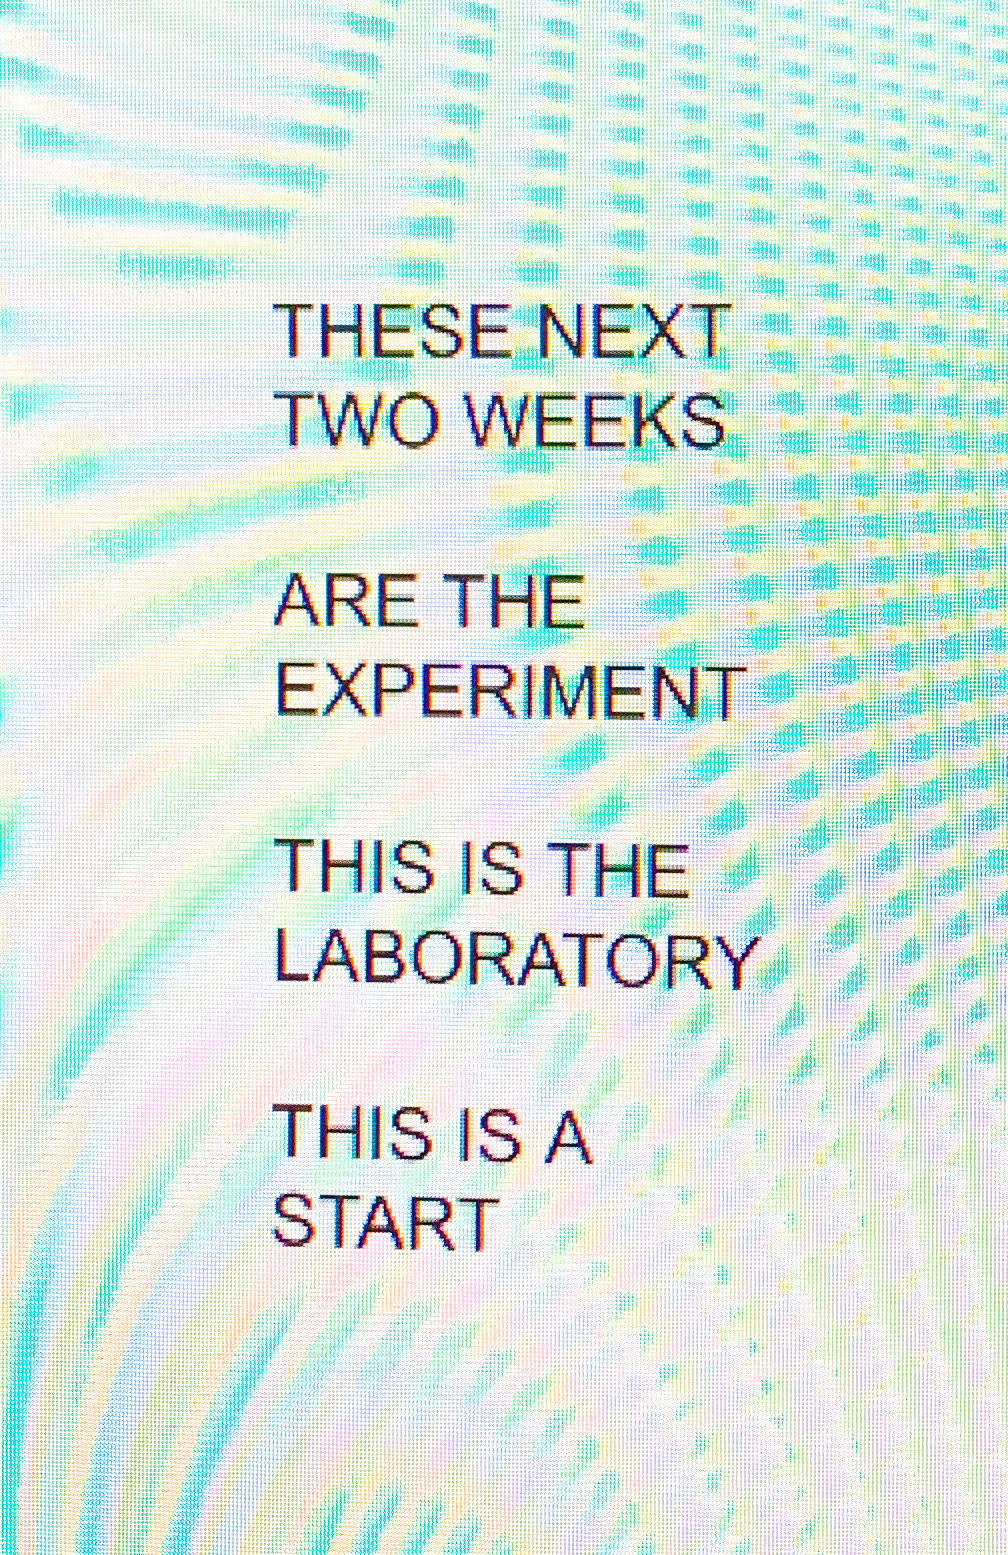 "THESE NEXT / TWO WEEKS / ARE THE / EXPERIMENT / THIS IS THE / LABORATORY / THIS IS A / START"